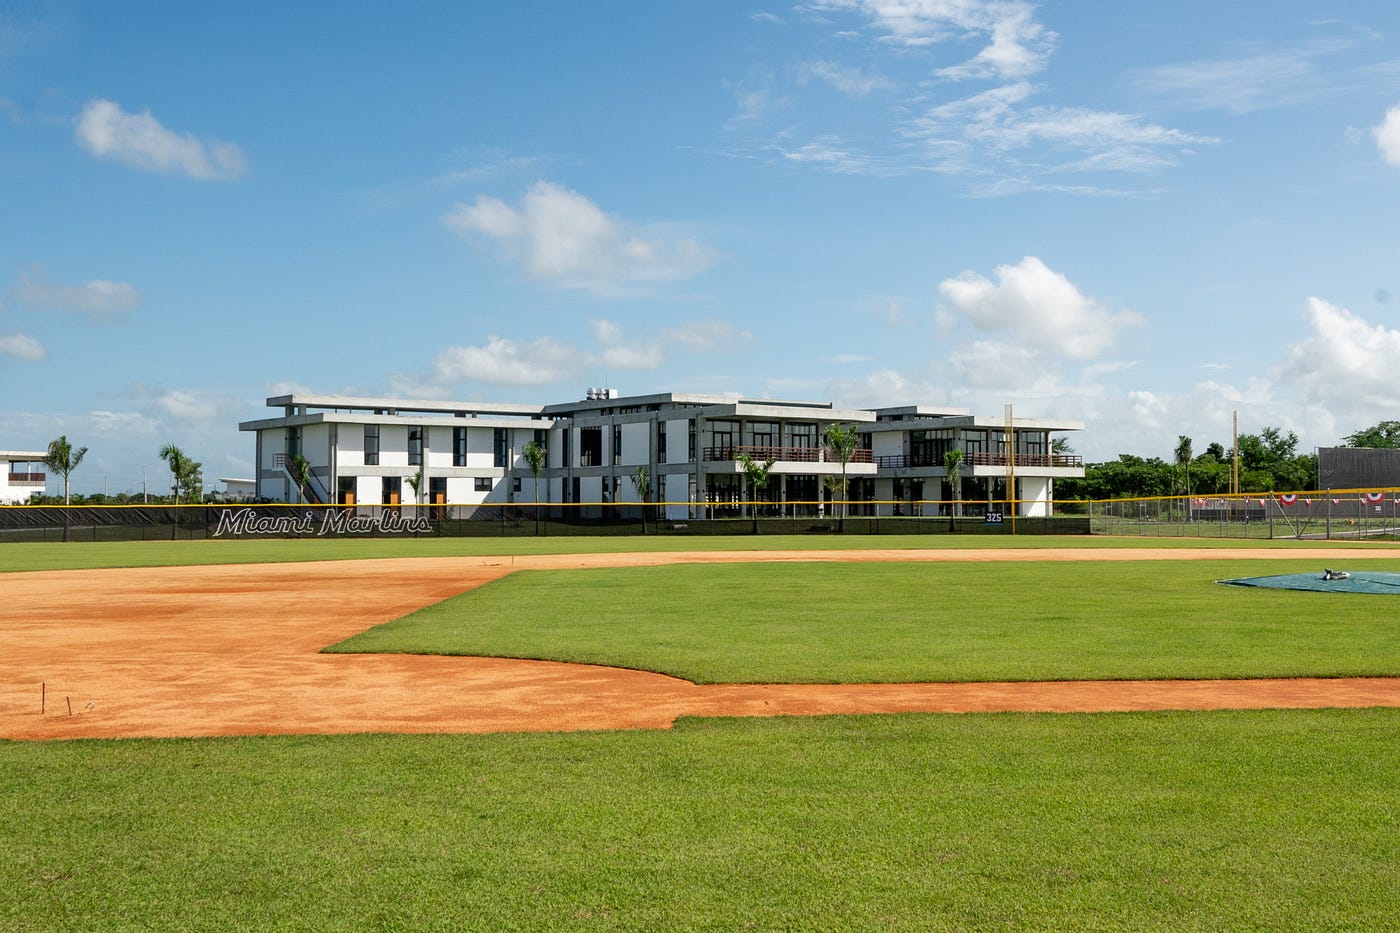 Marlins' academy in the DR, 10/28/2022